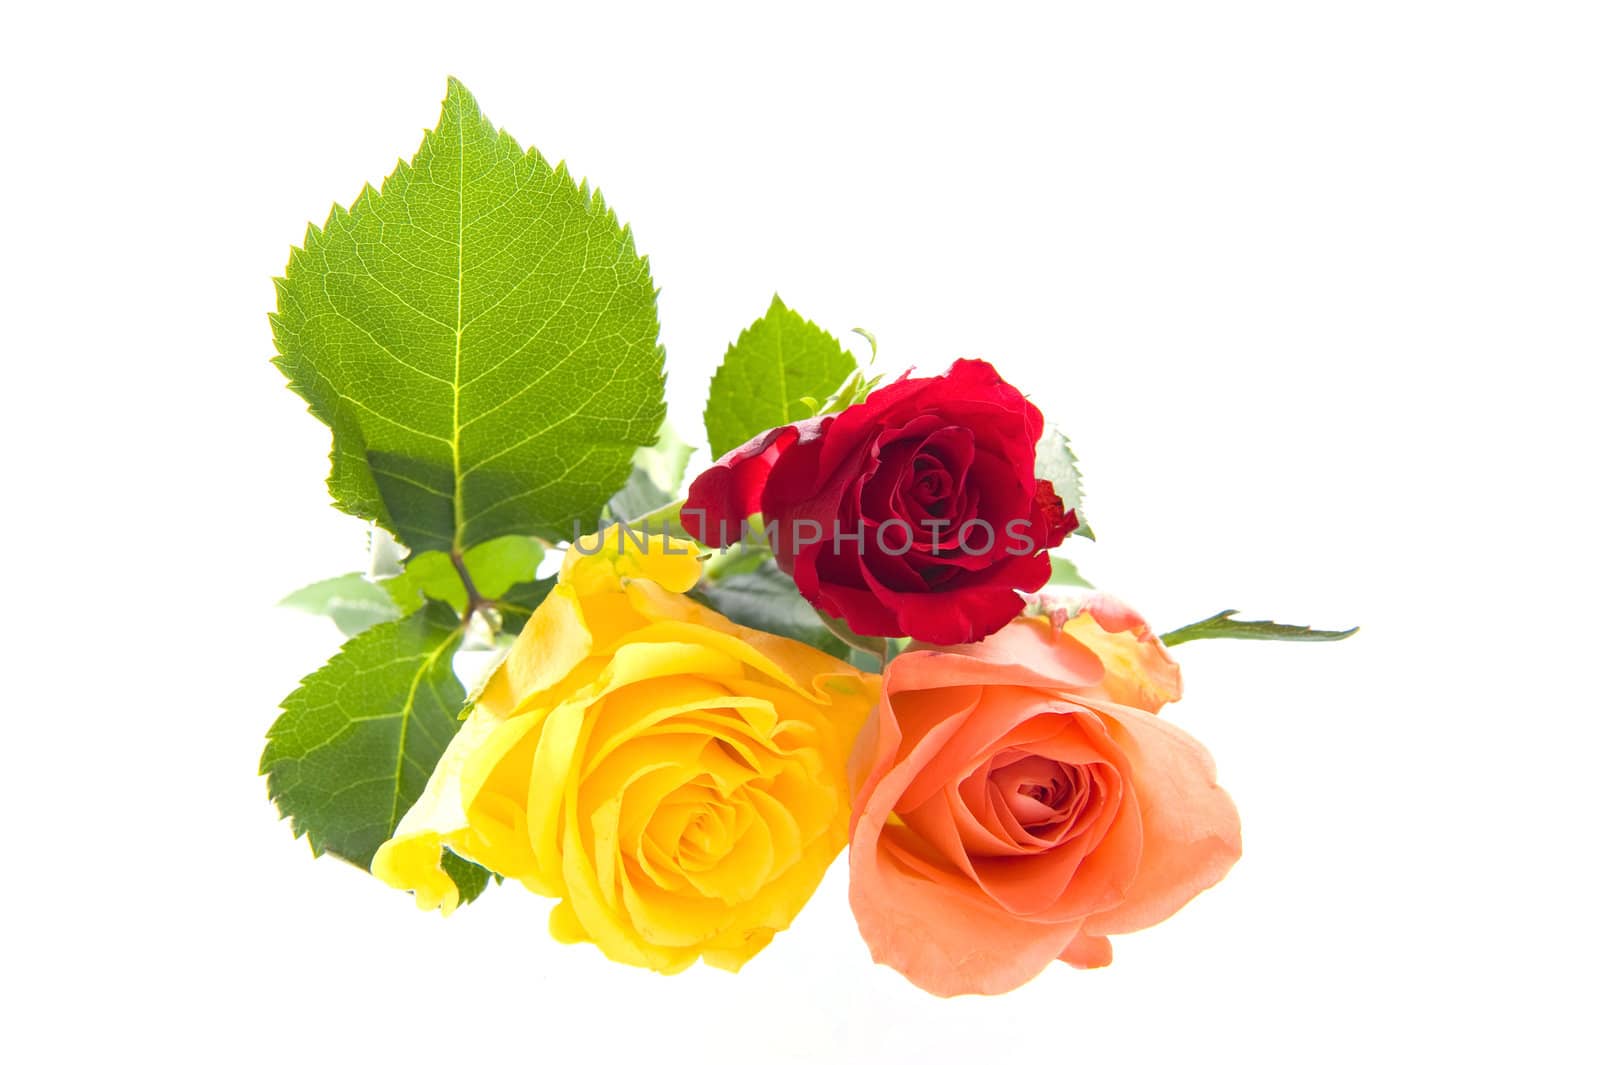 Three beautiful roses on a white background